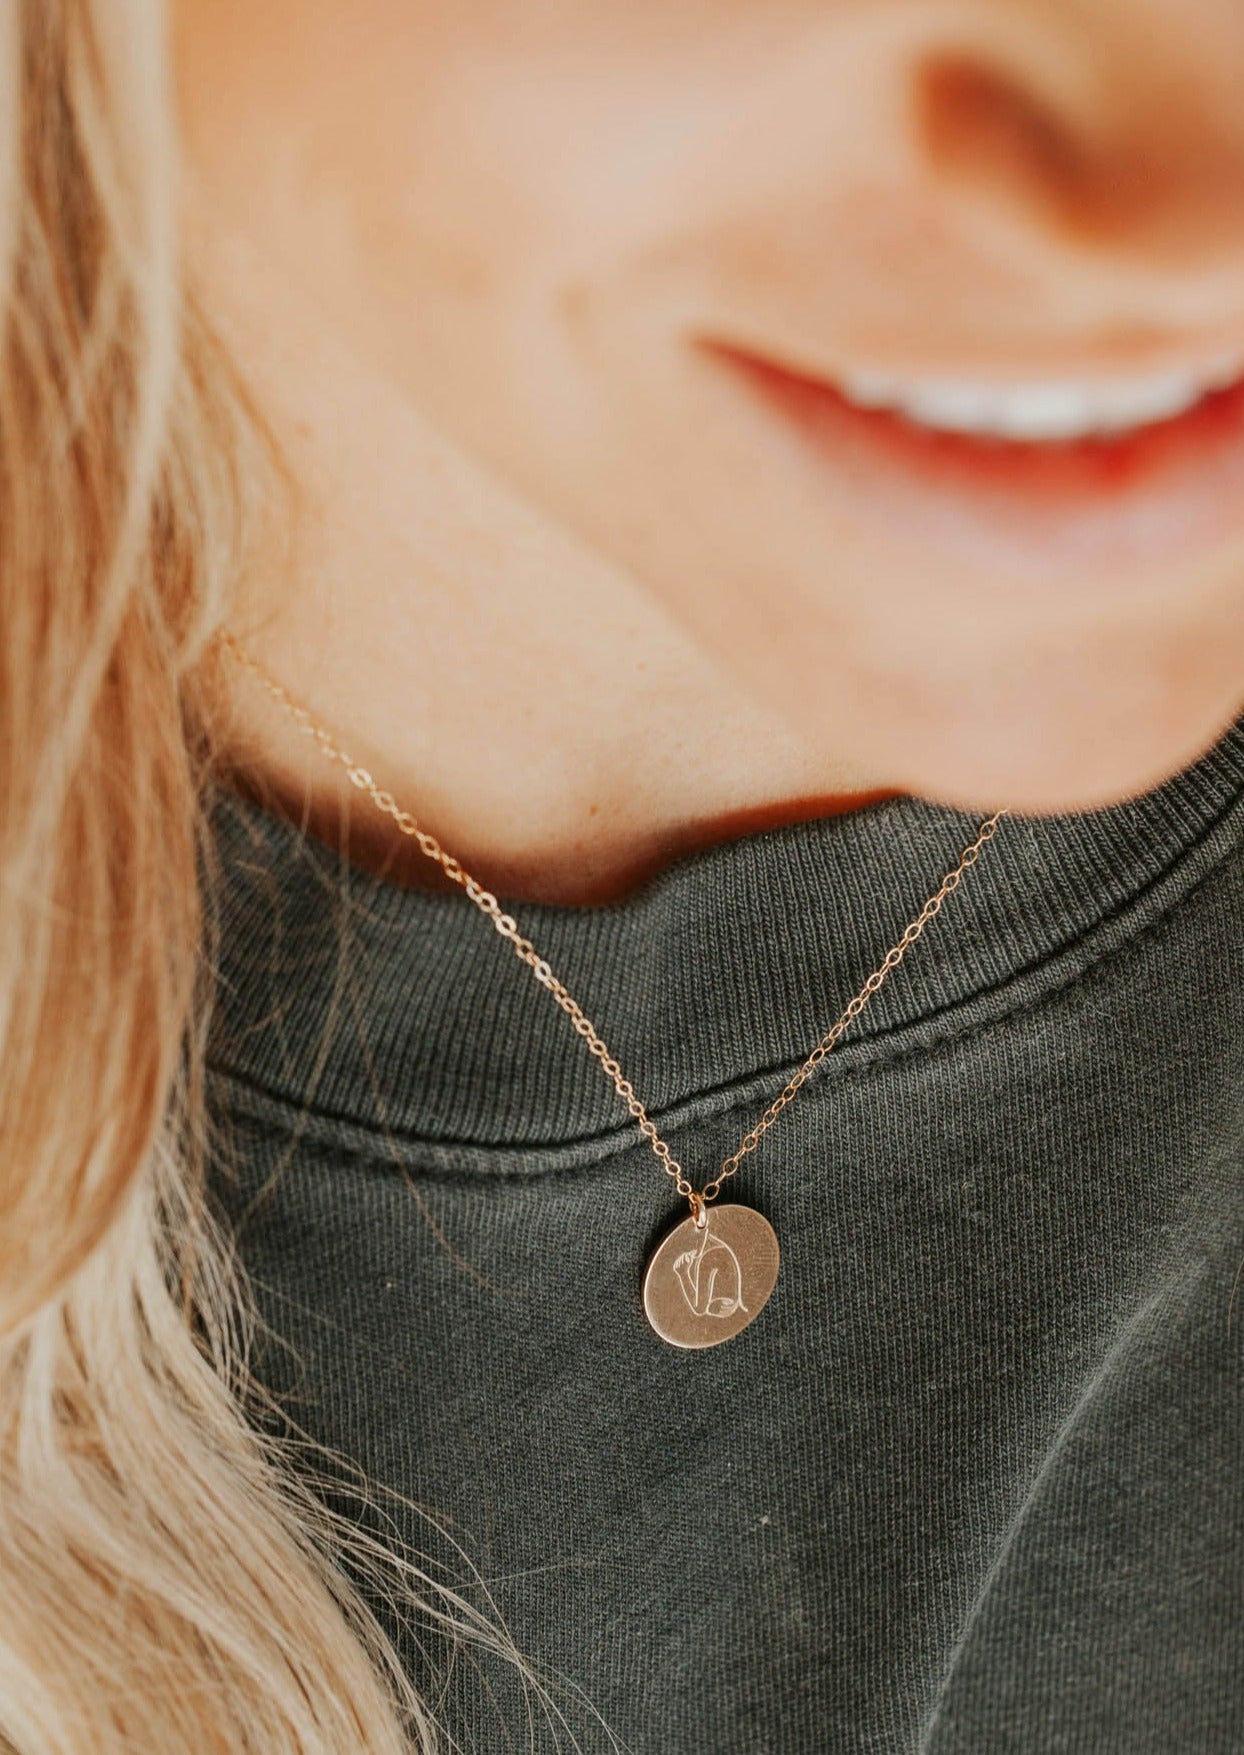 A young model wearing a 14kt Gold Fill necklace with a hand-stamped disc of a feminine silhouette that promotes body positivity..